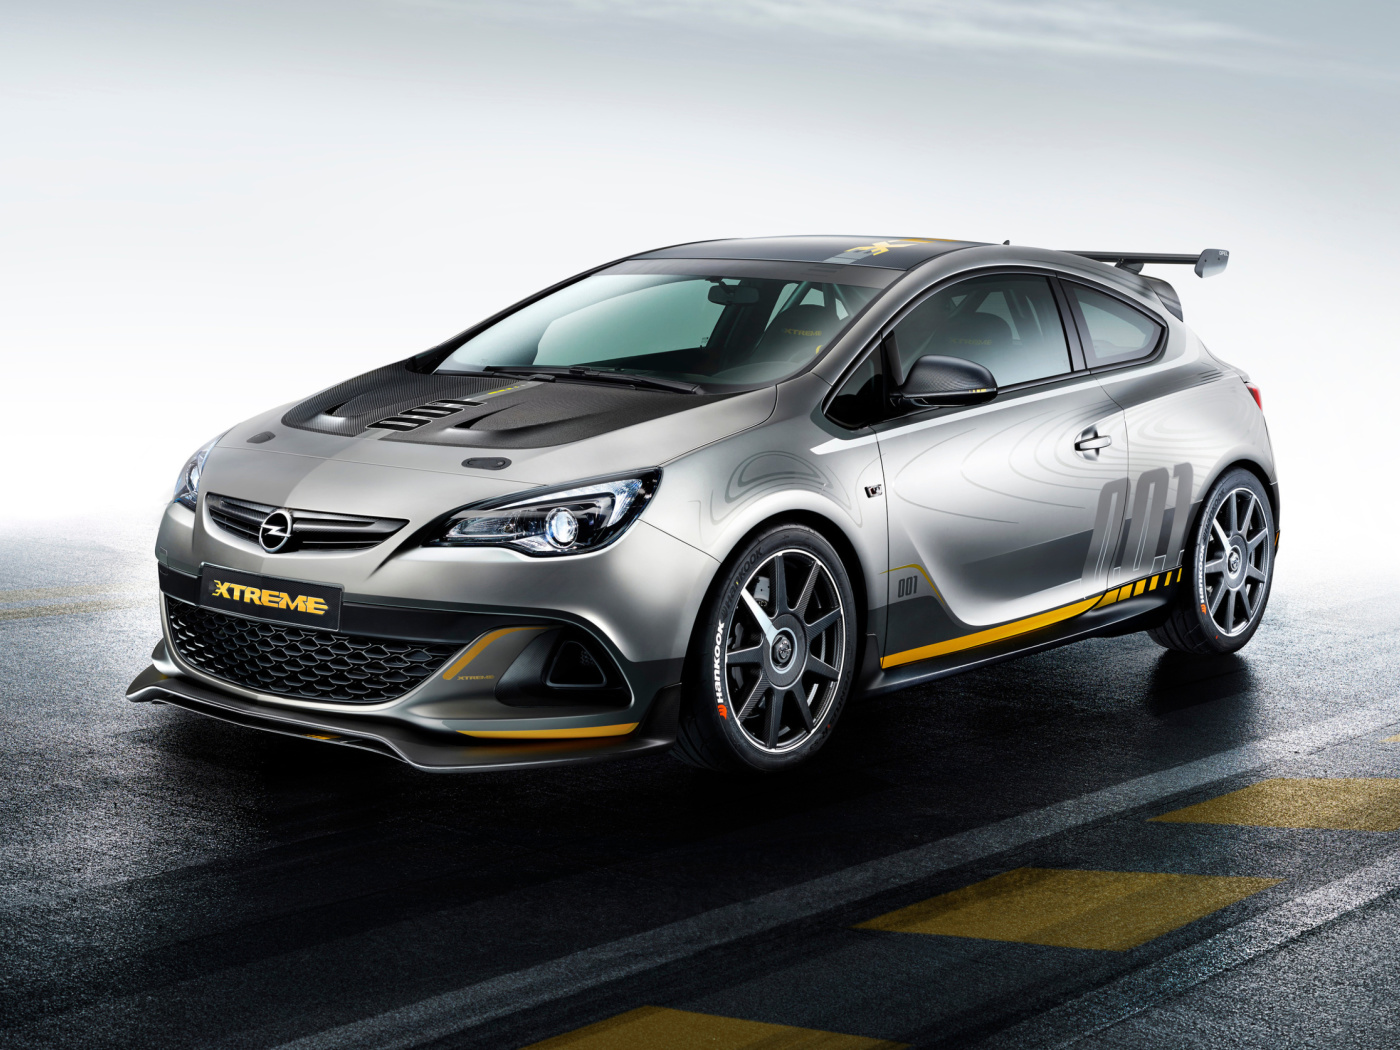 Opel Astra OPC Extreme wallpaper 1400x1050